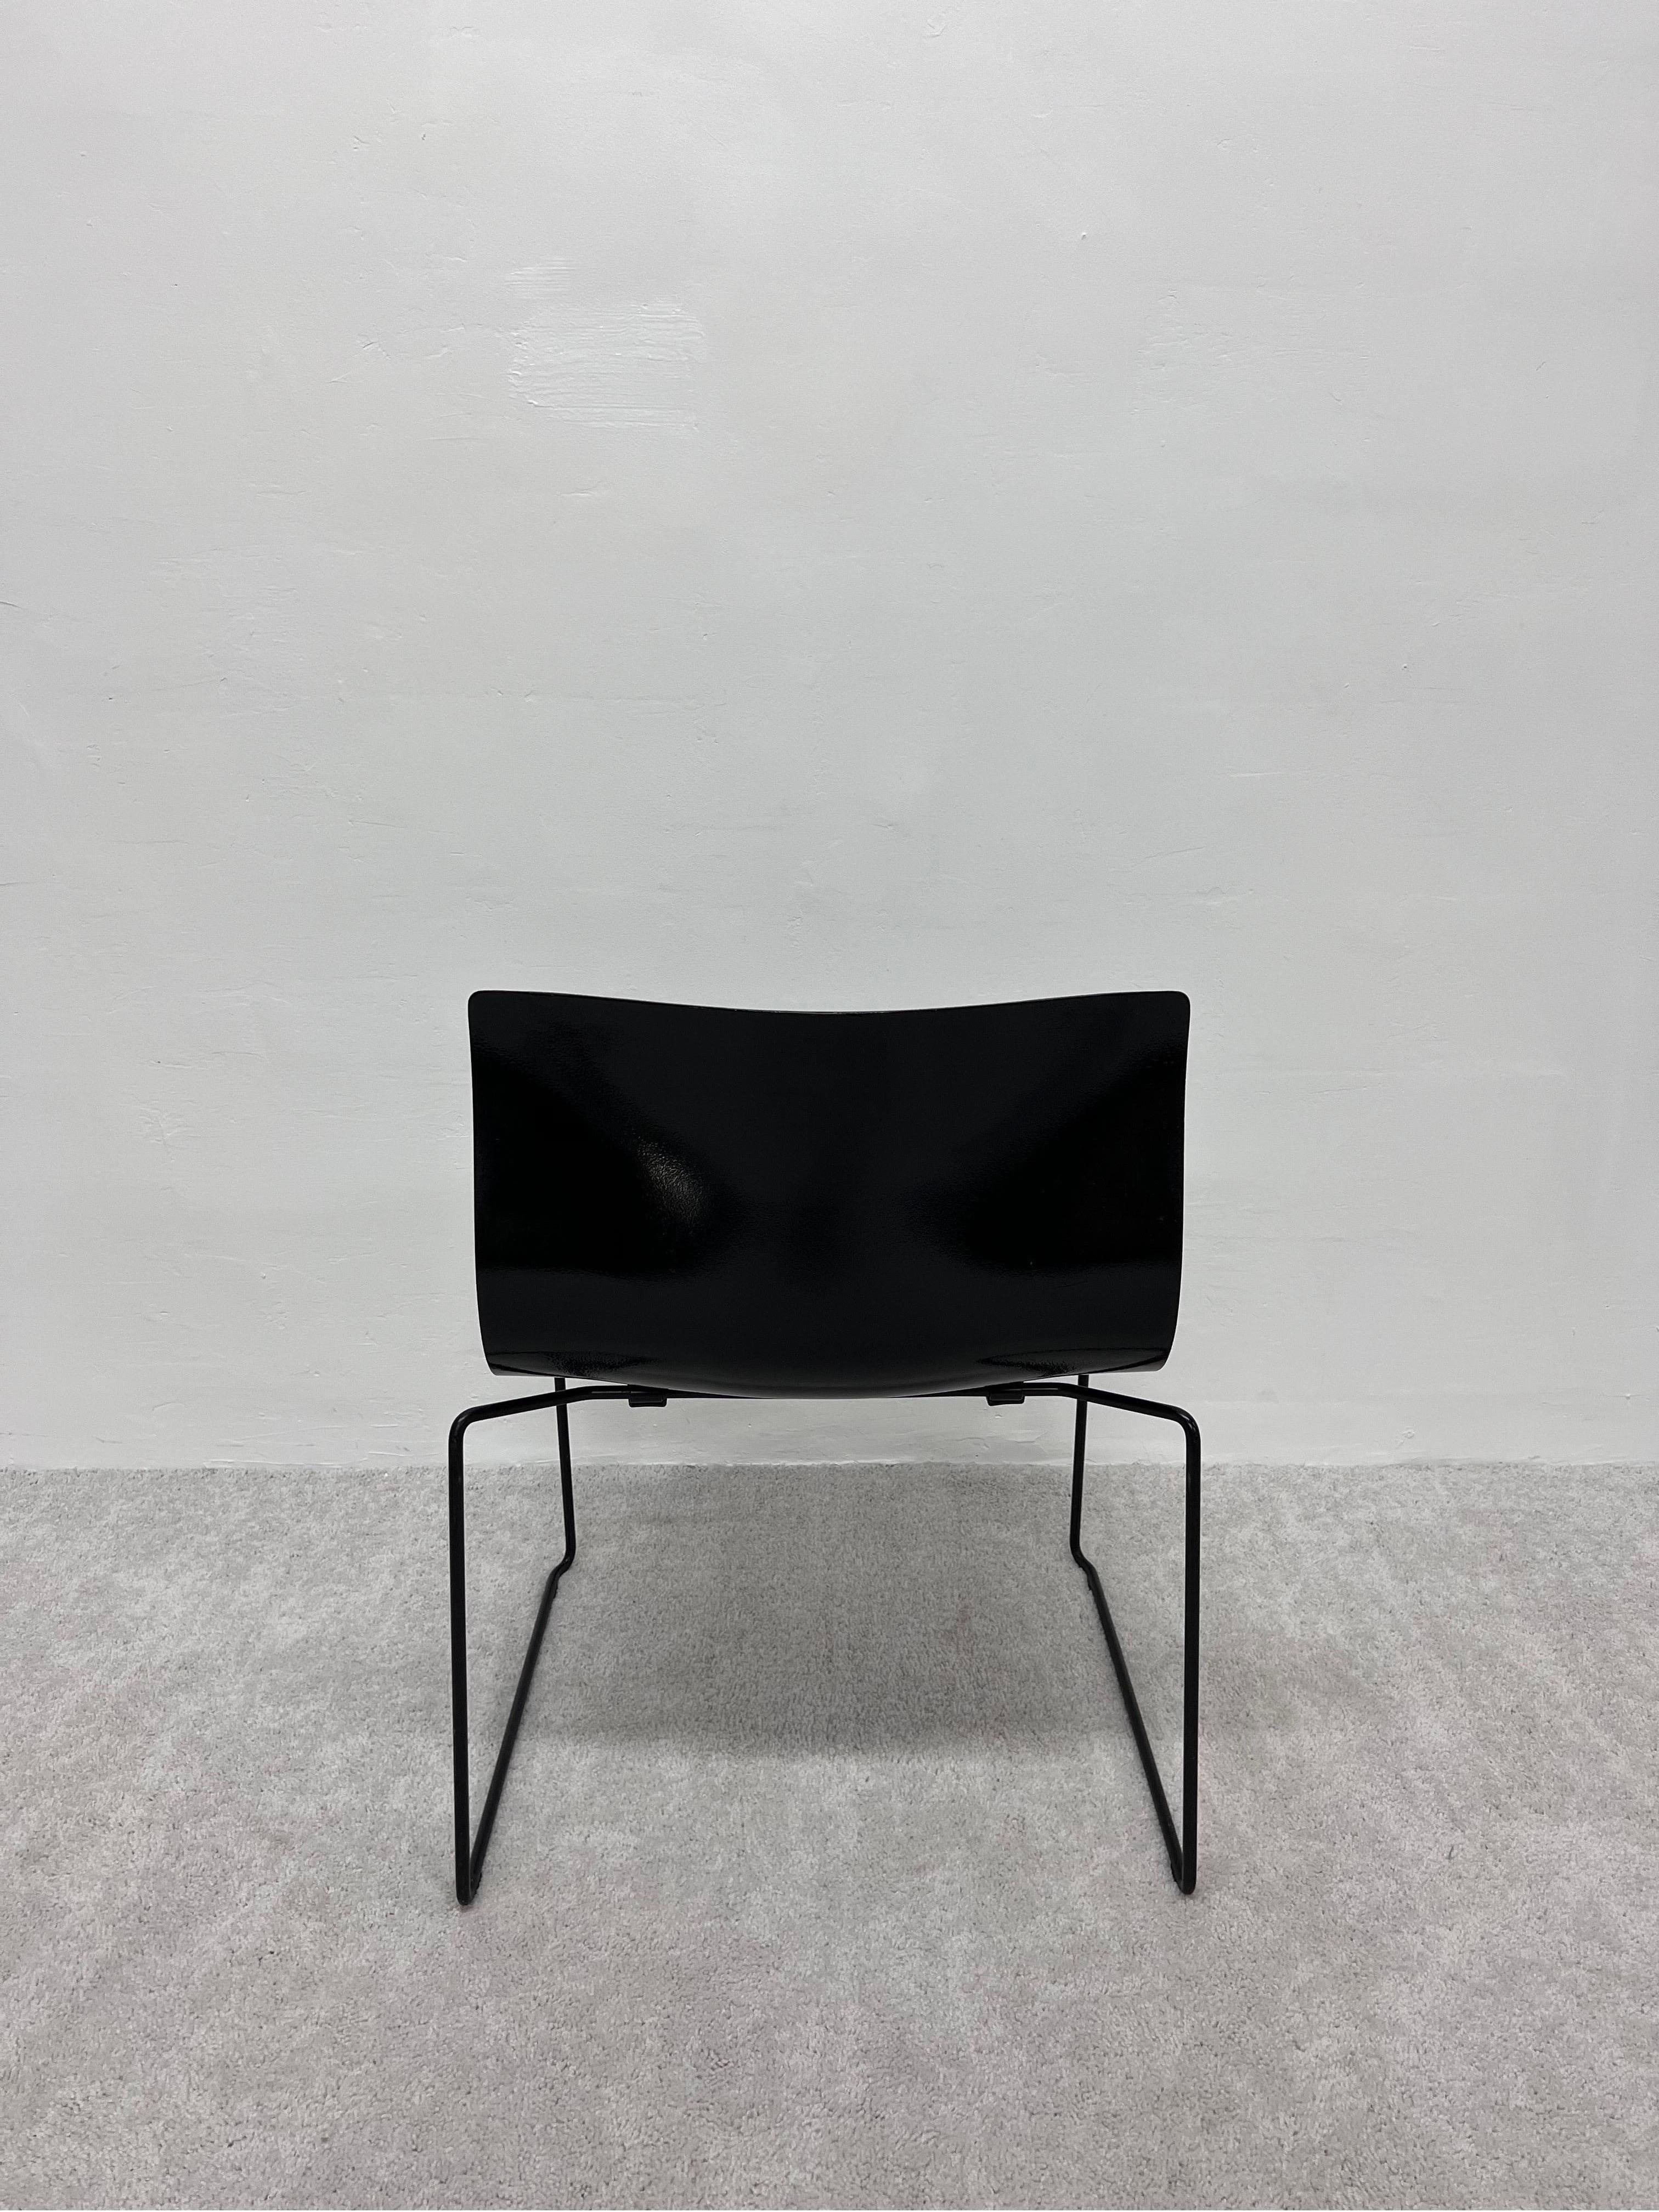 Italian Lella and Massimo Vignelli Handkerchief Chairs for Knoll, Set of Four For Sale